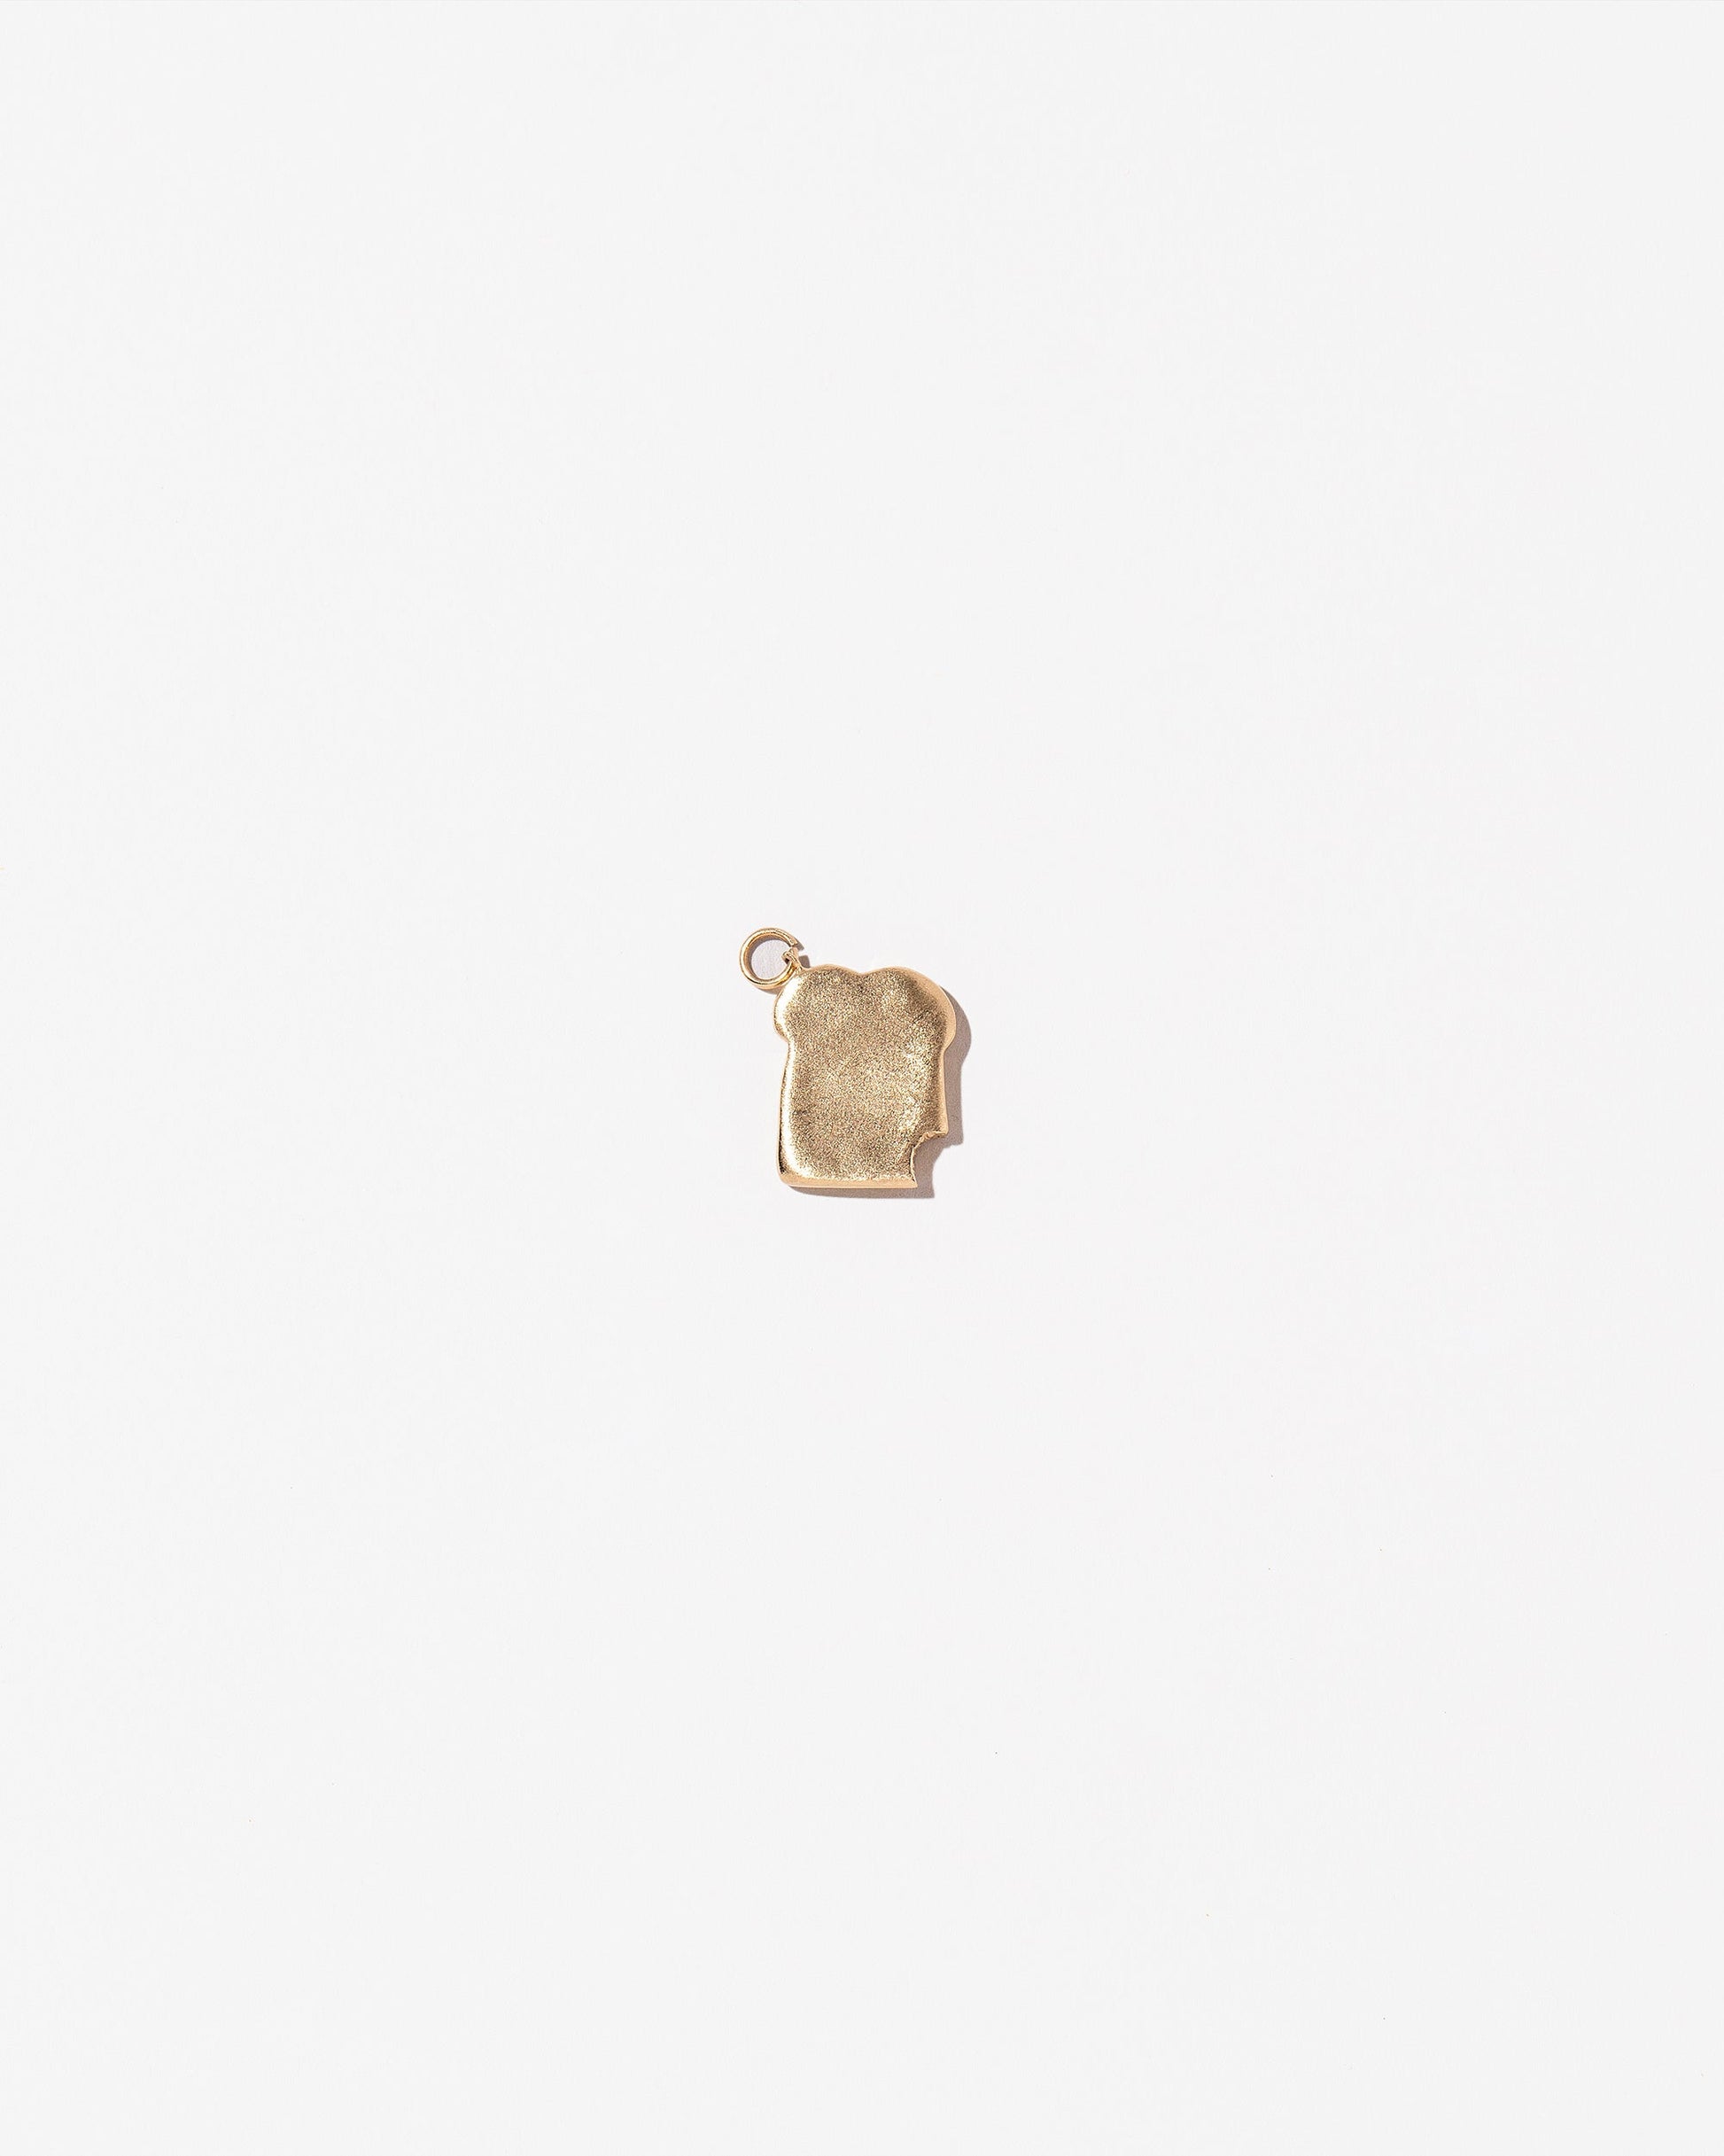  Toast Charm - with a Bite on light color background.